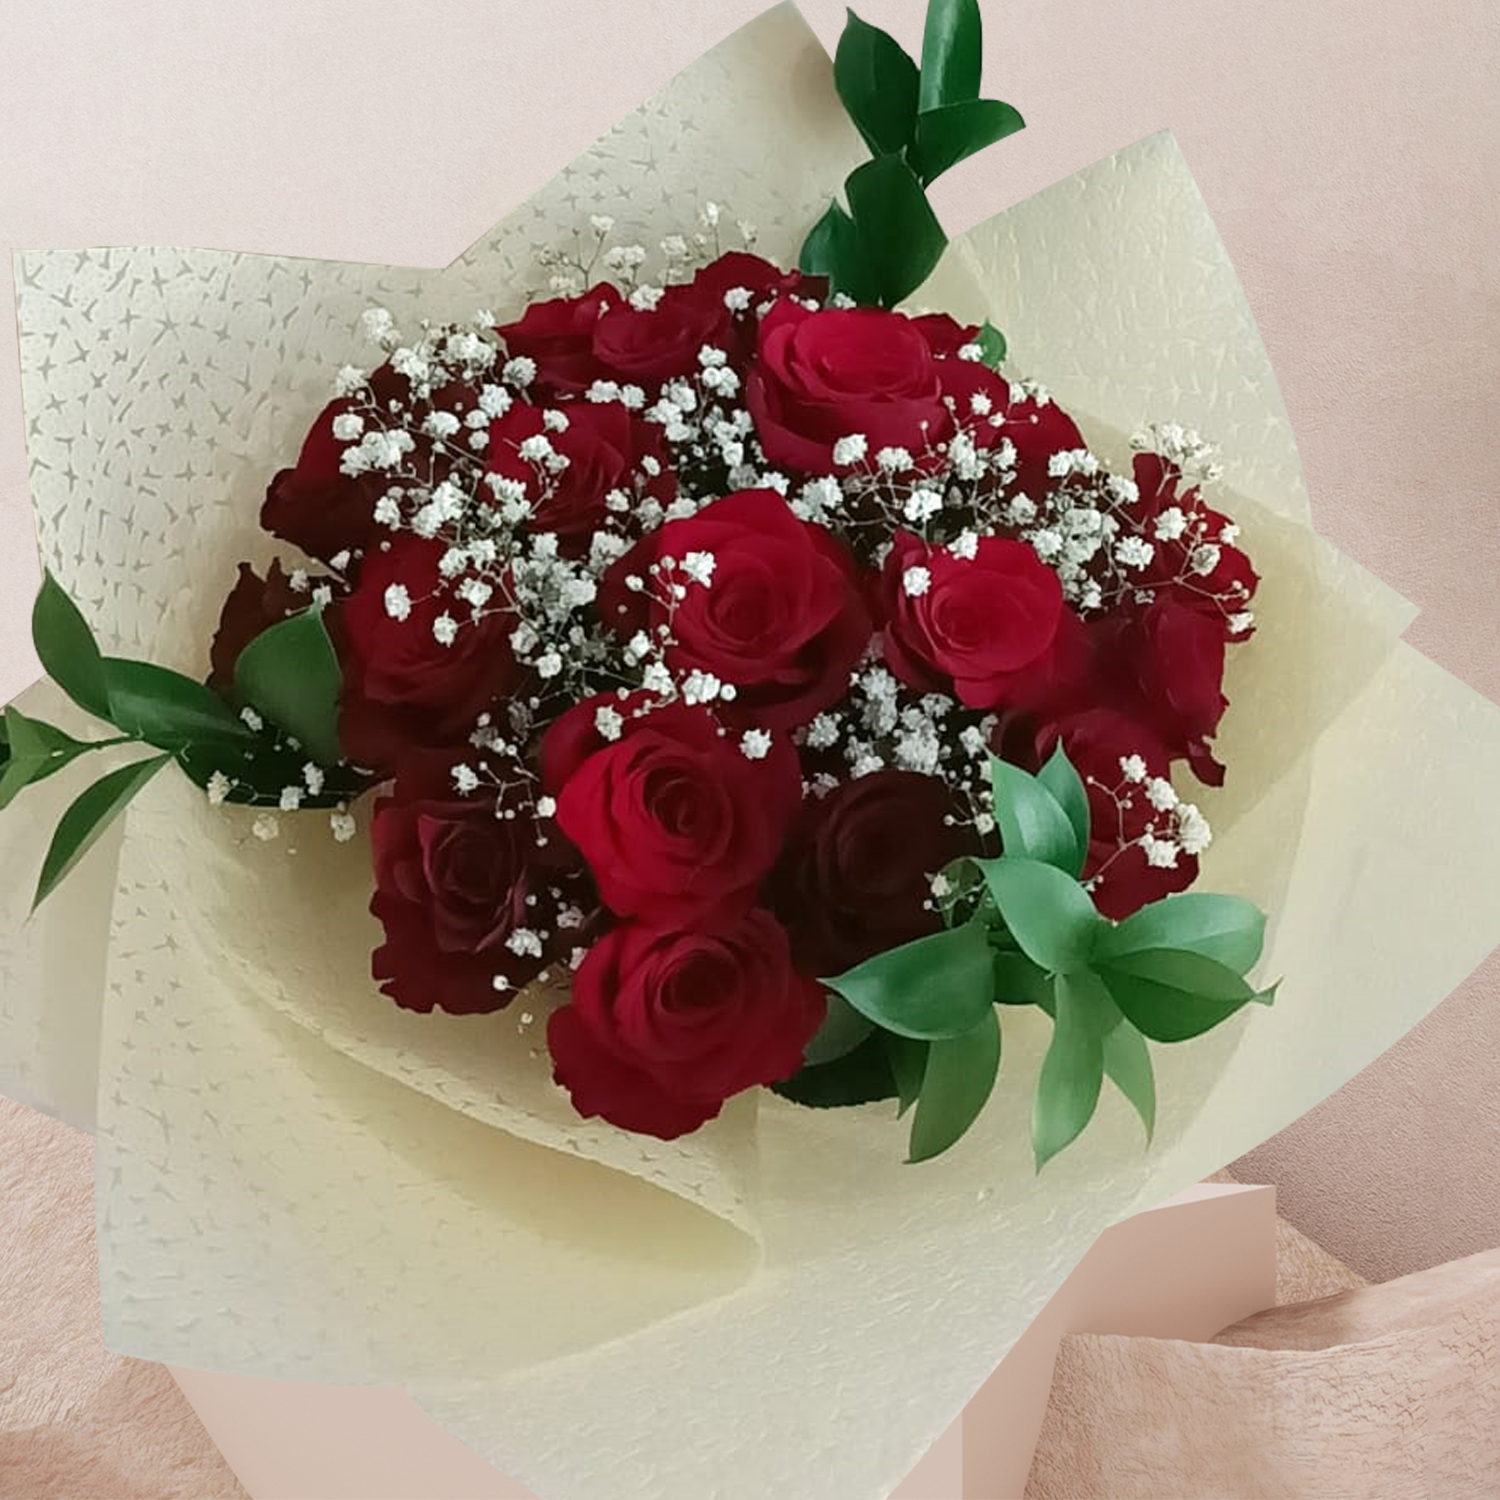 20 Red Roses Bouquet